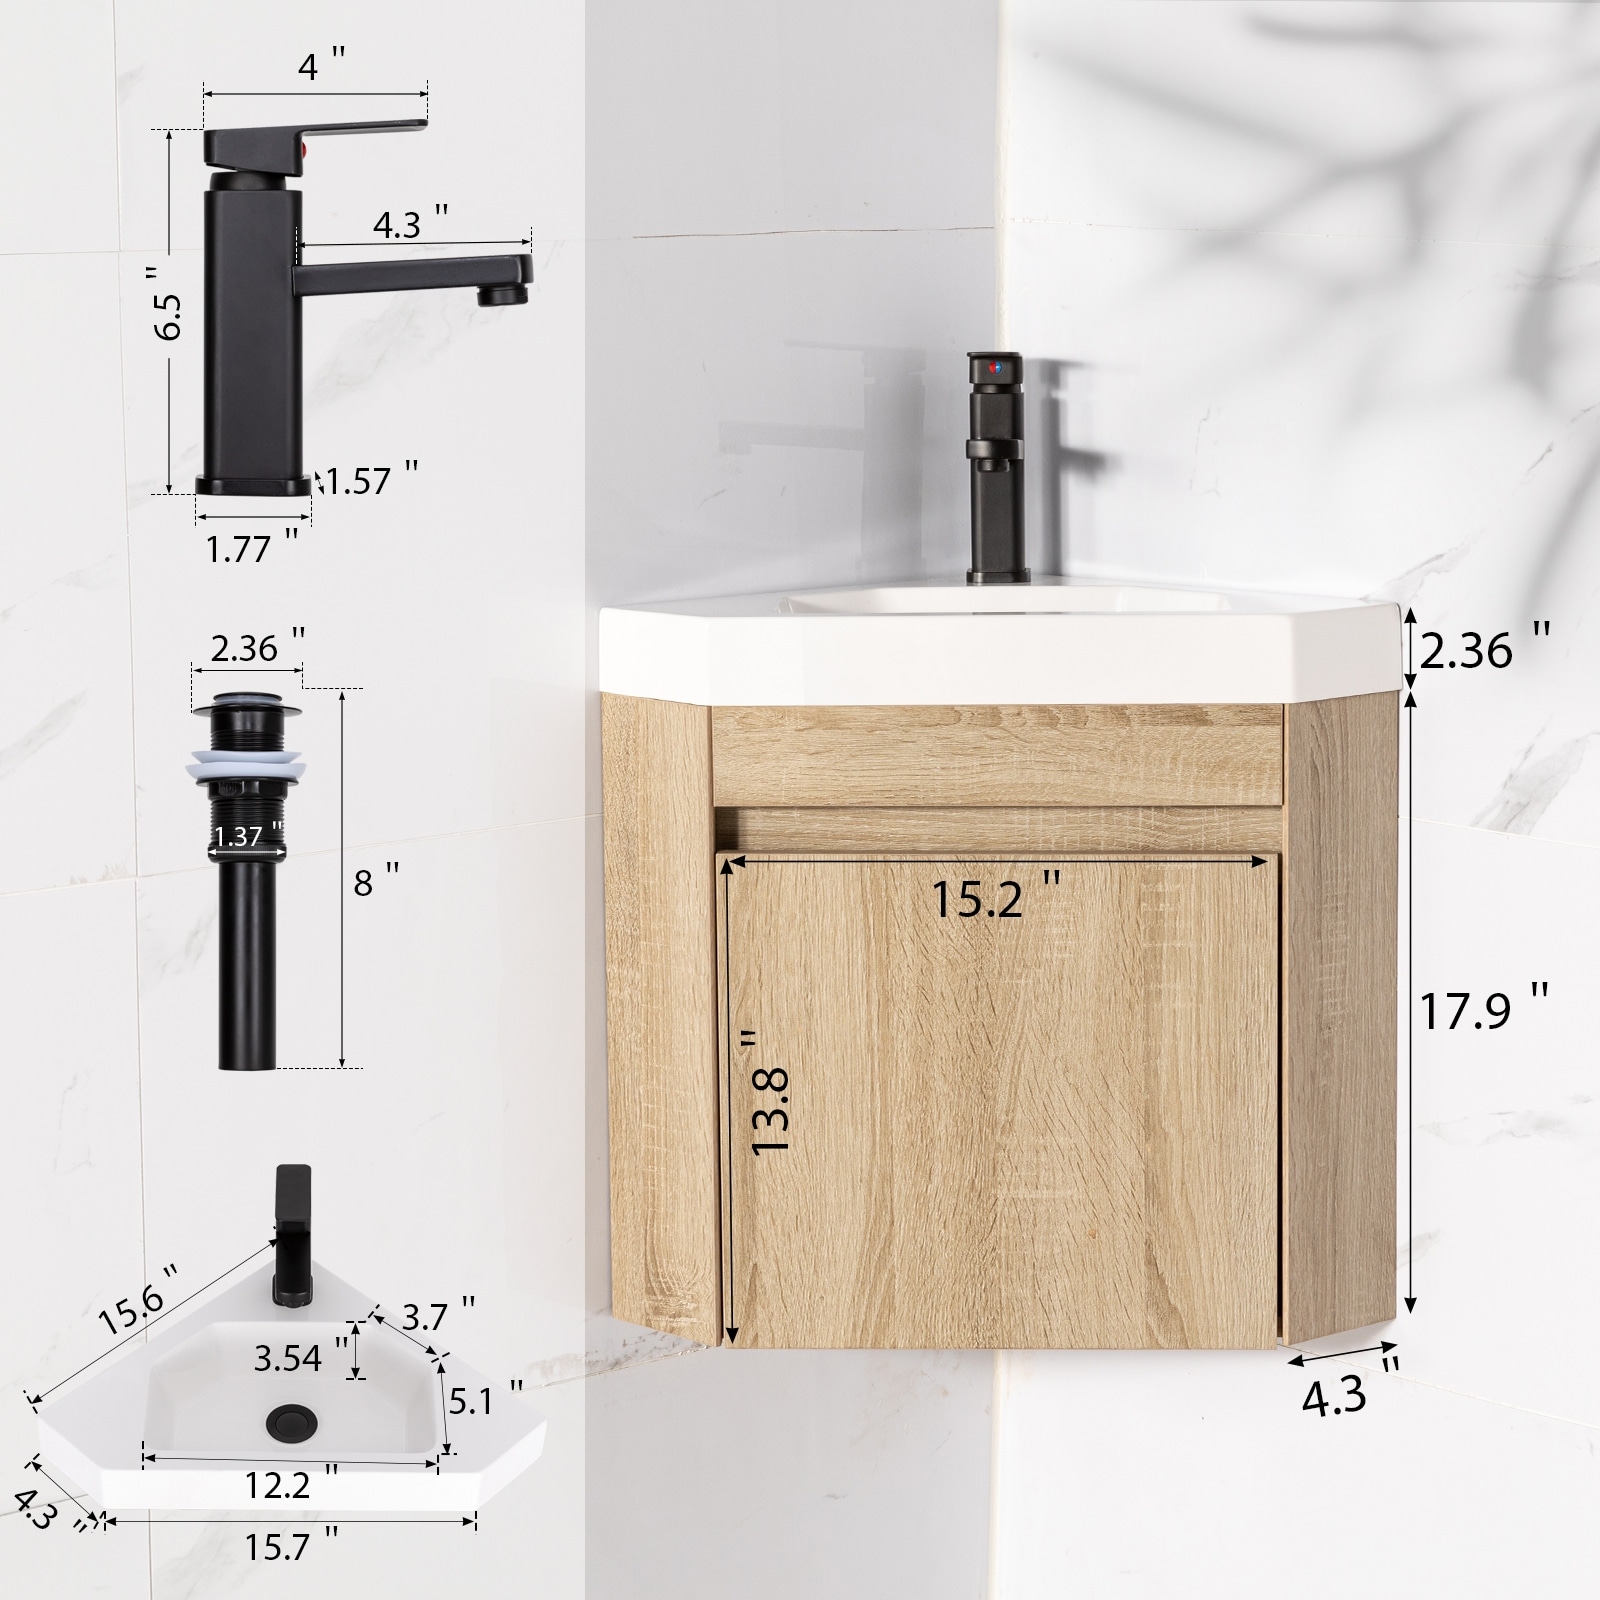 https://ak1.ostkcdn.com/images/products/is/images/direct/cc8829c3d4246dade7c838e14d08b63db11f322a/Wall-Mounted-Corner-Bathroom-Vanity-Sink-Combo-for-Small-Space.jpg